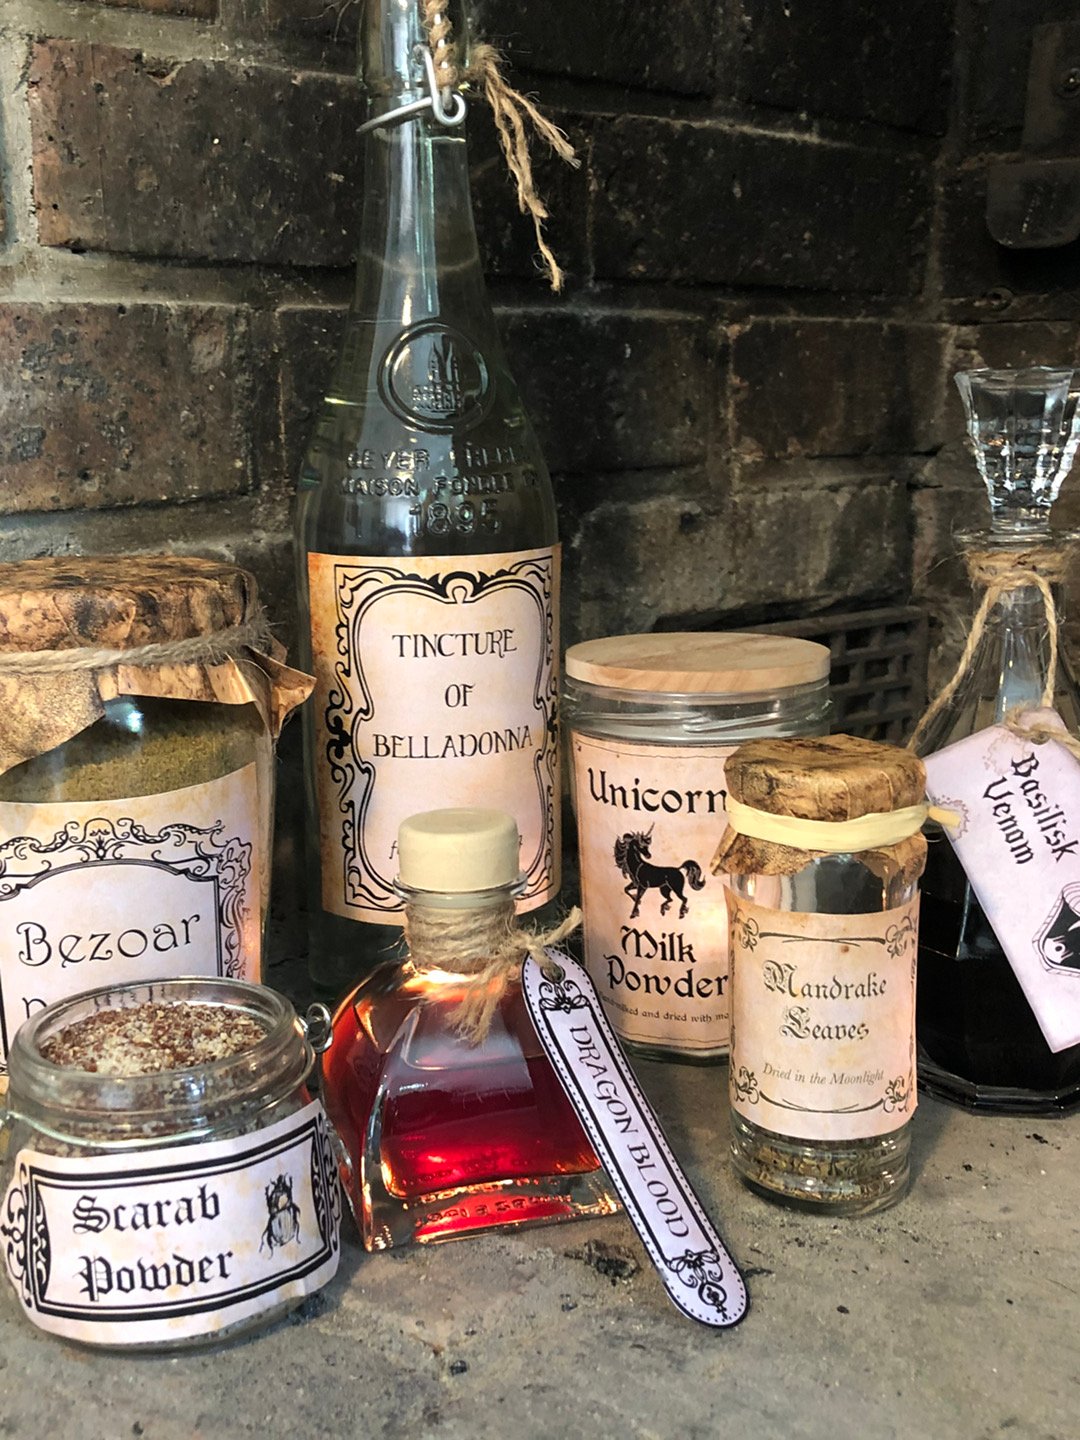 How to make Harry Potter potions & DIY magic potions (Free labels!)